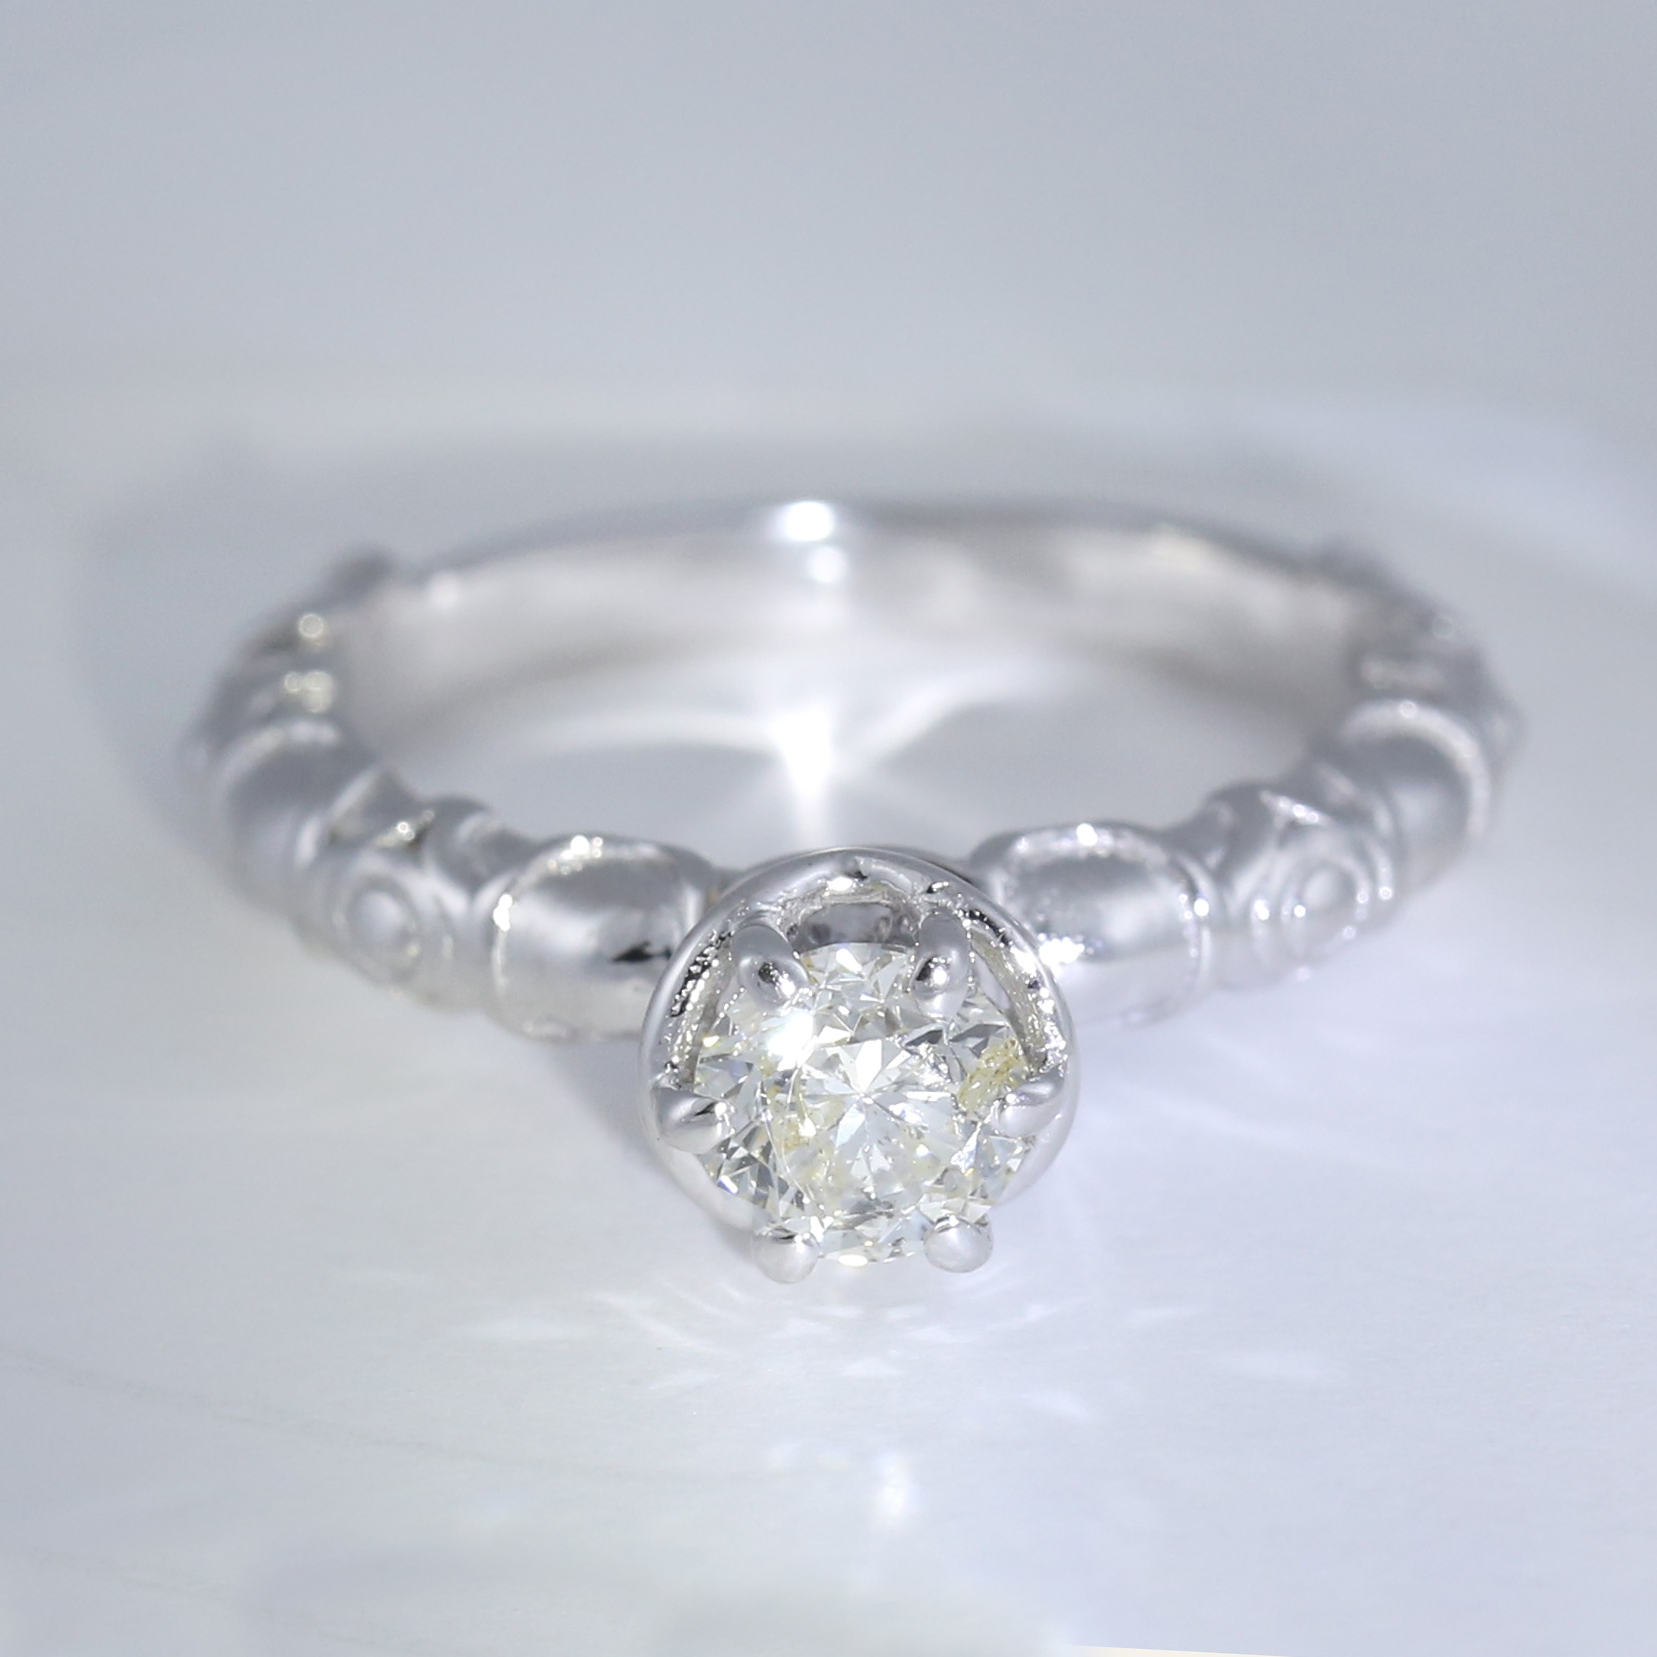 14 K / 585 White Gold Solitaire Diamond Ring - Image 6 of 9